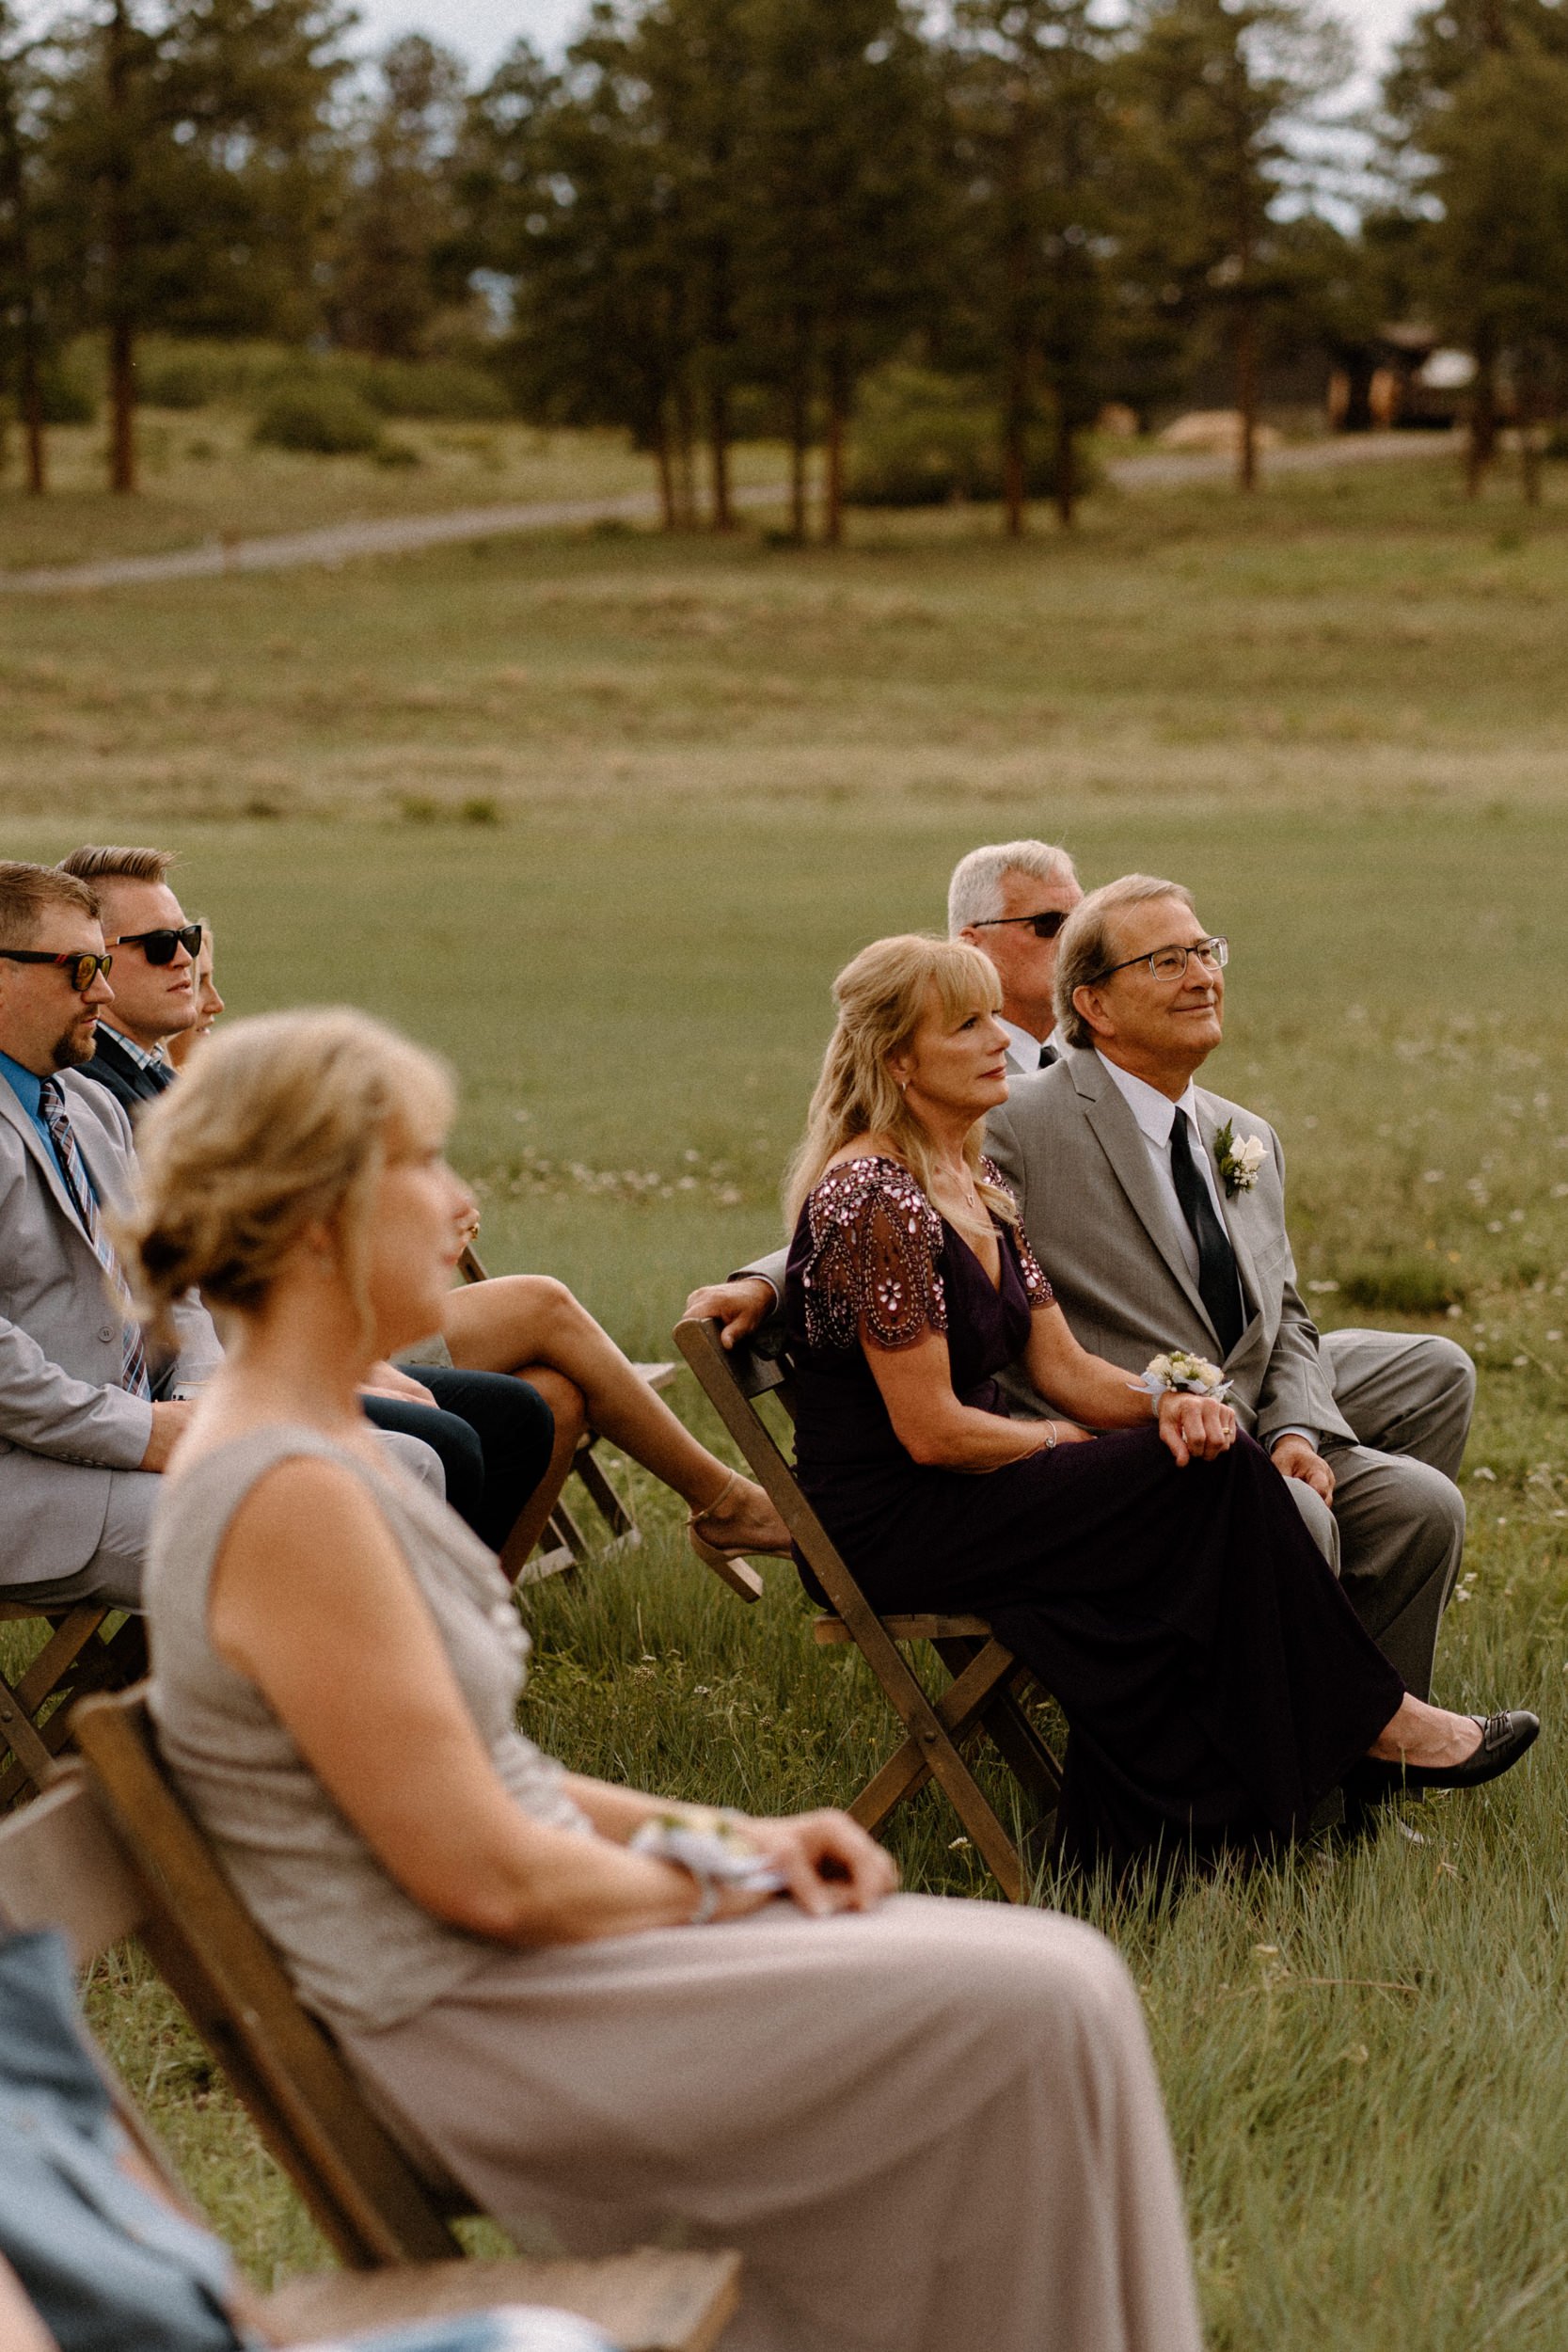 Guests look on as the wedding ceremony proceeds